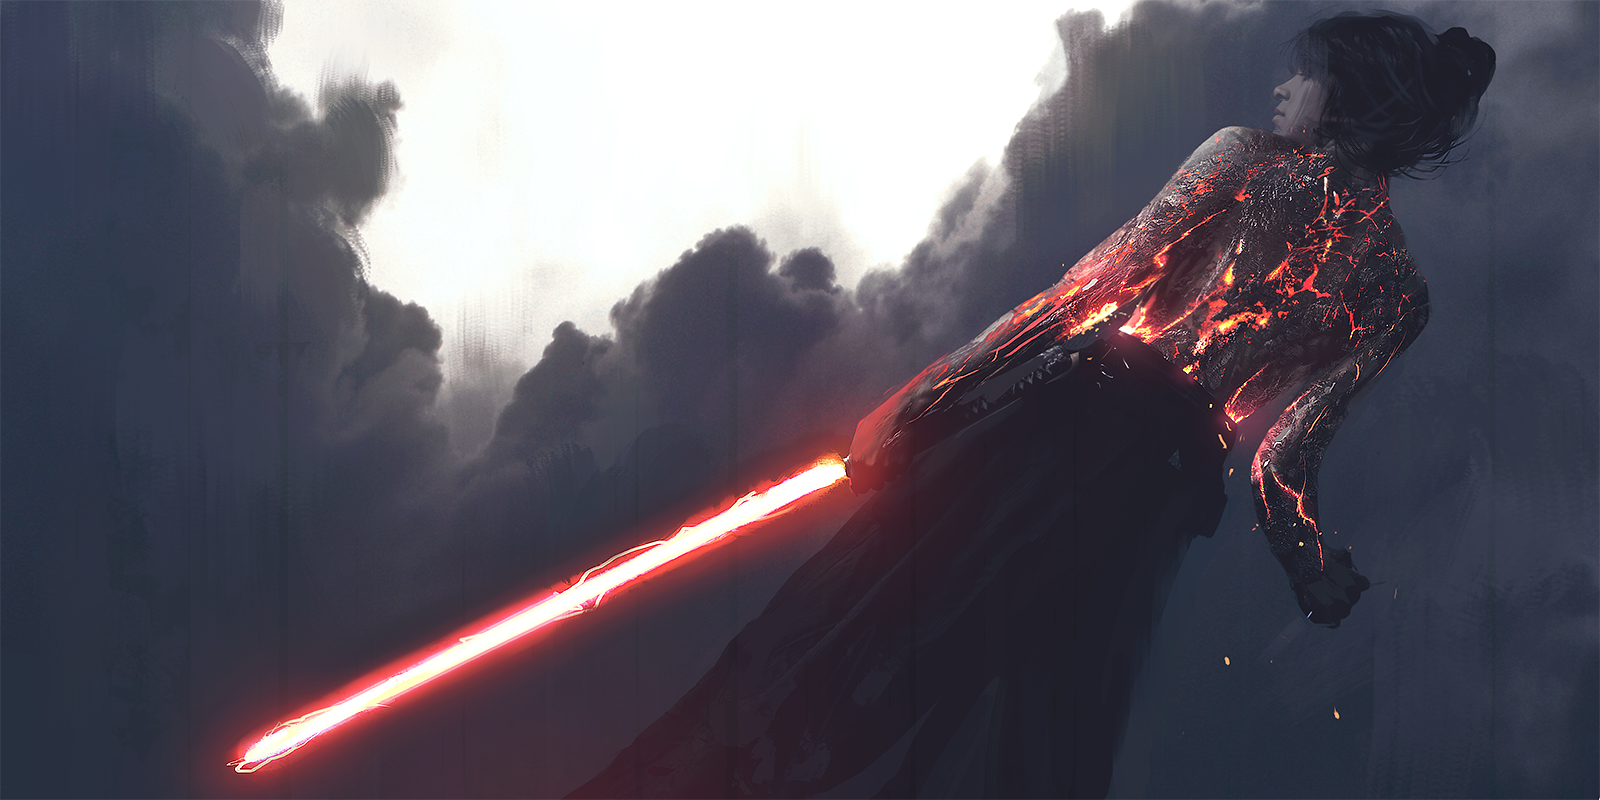 Would love it if someone animated this star wars wallpaper. Especially her Back and saber: wallpaperengine